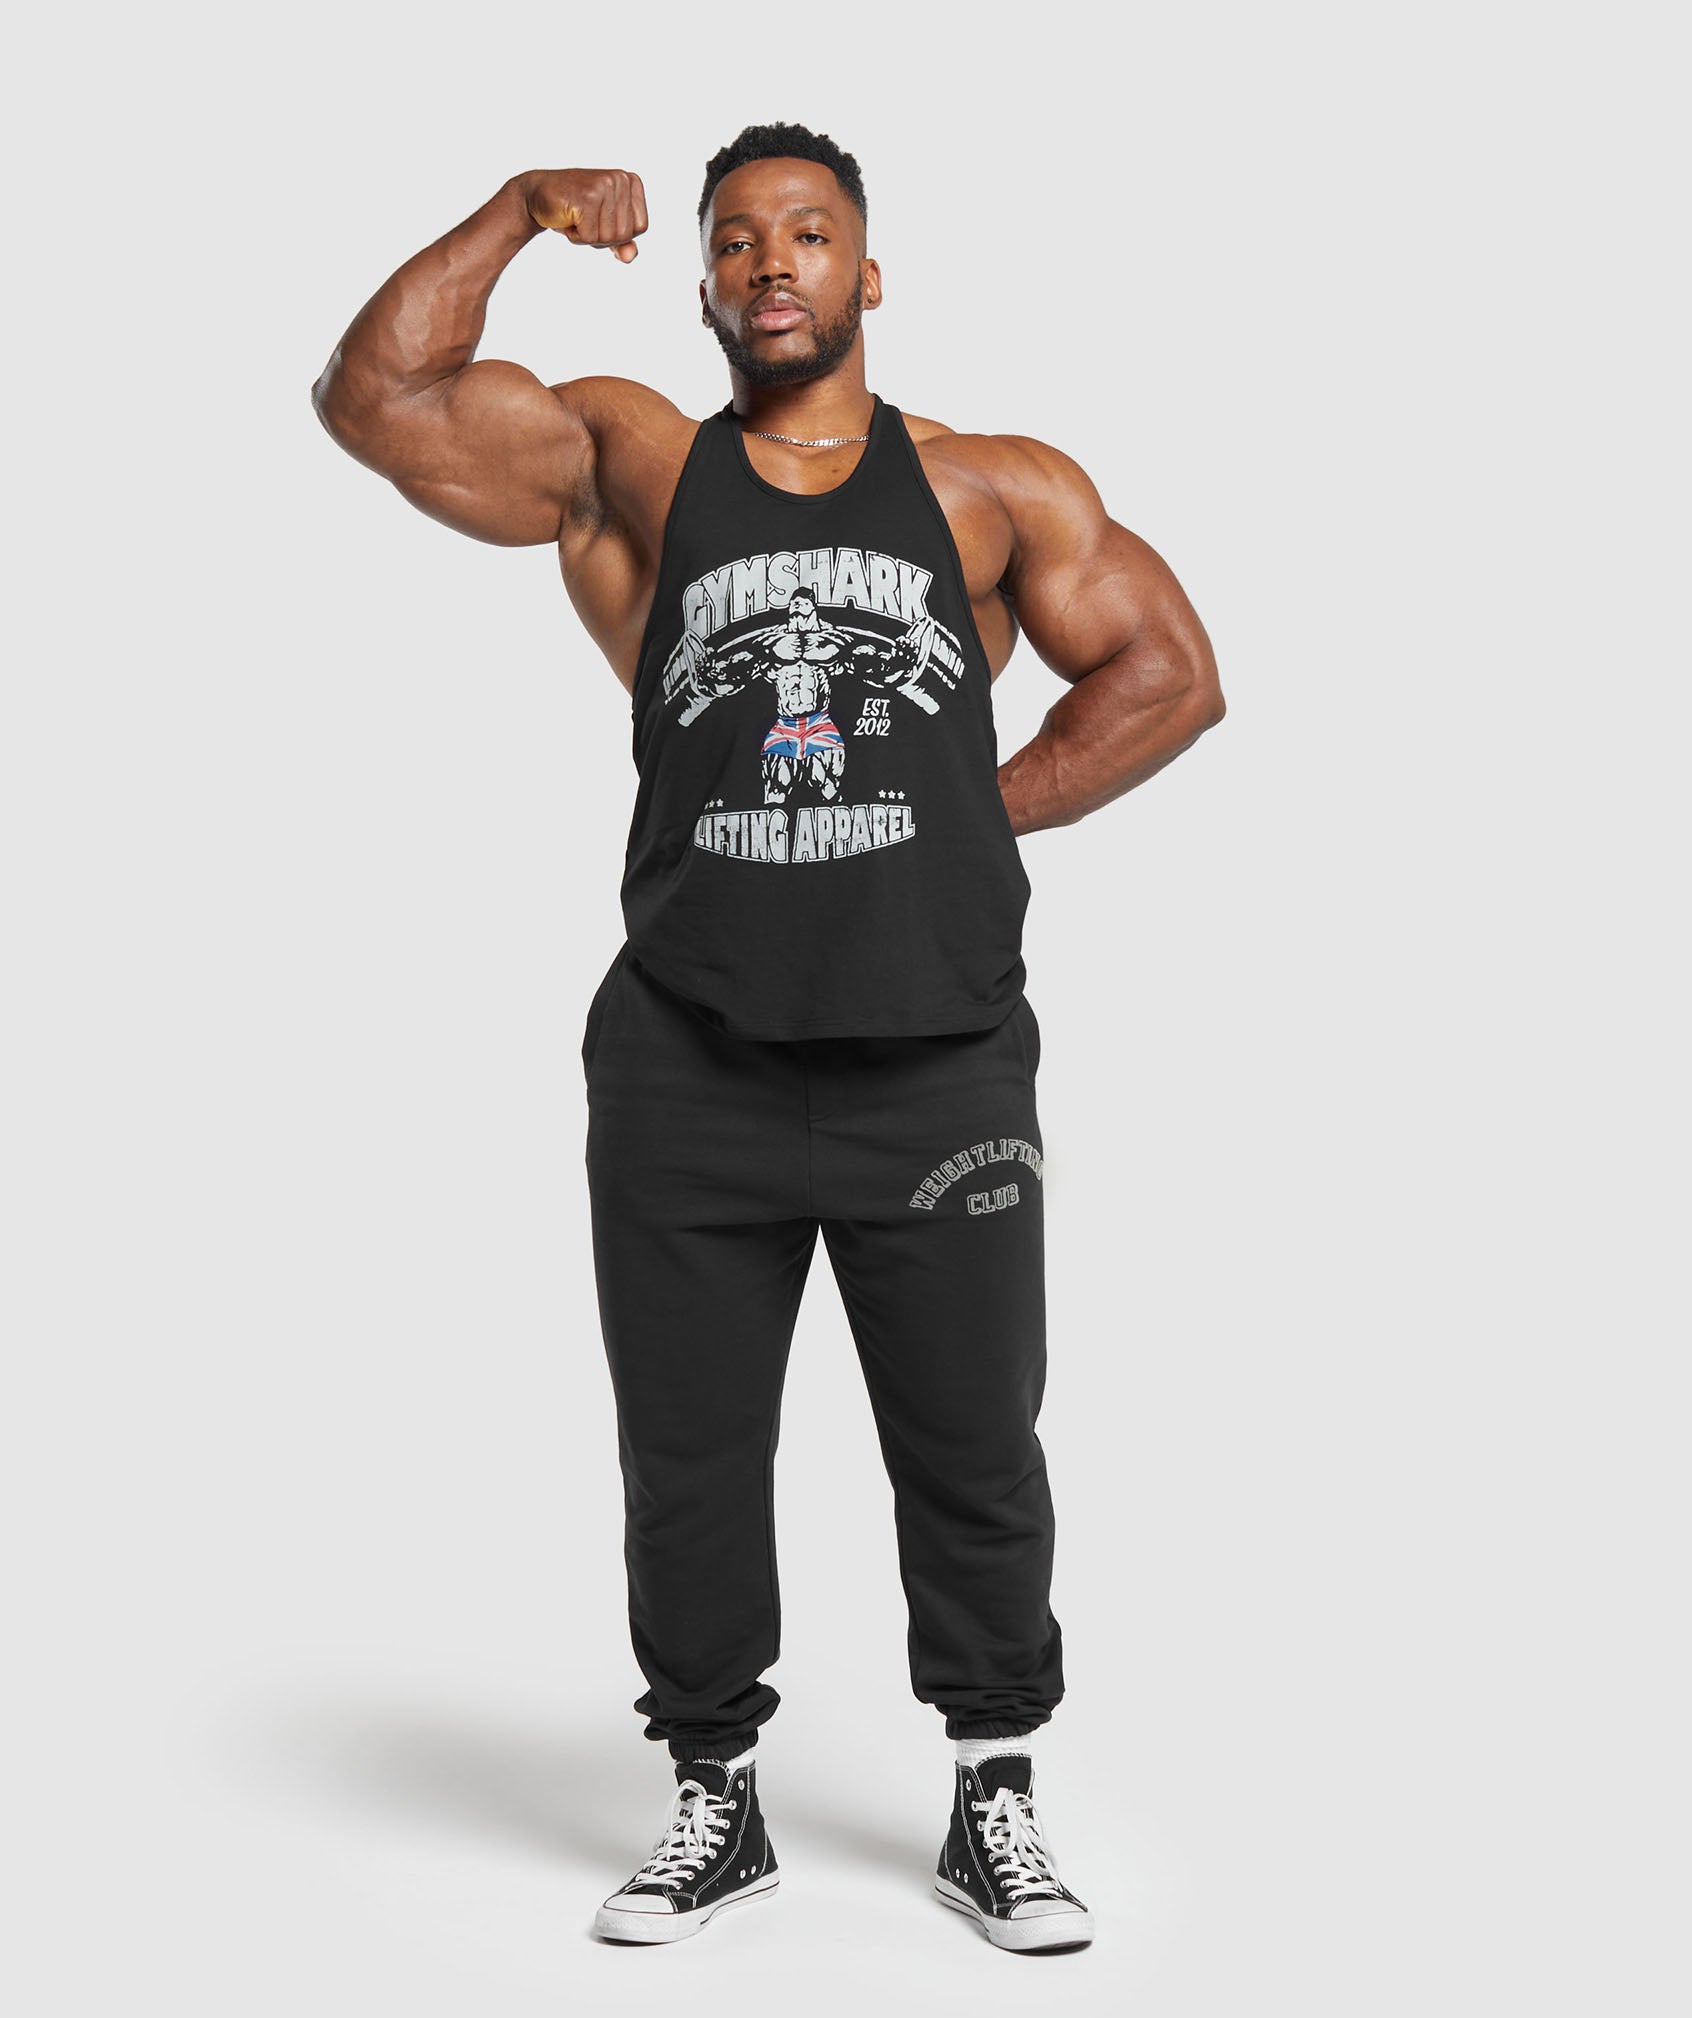 Lifting Apparel Stringer in Black - view 4